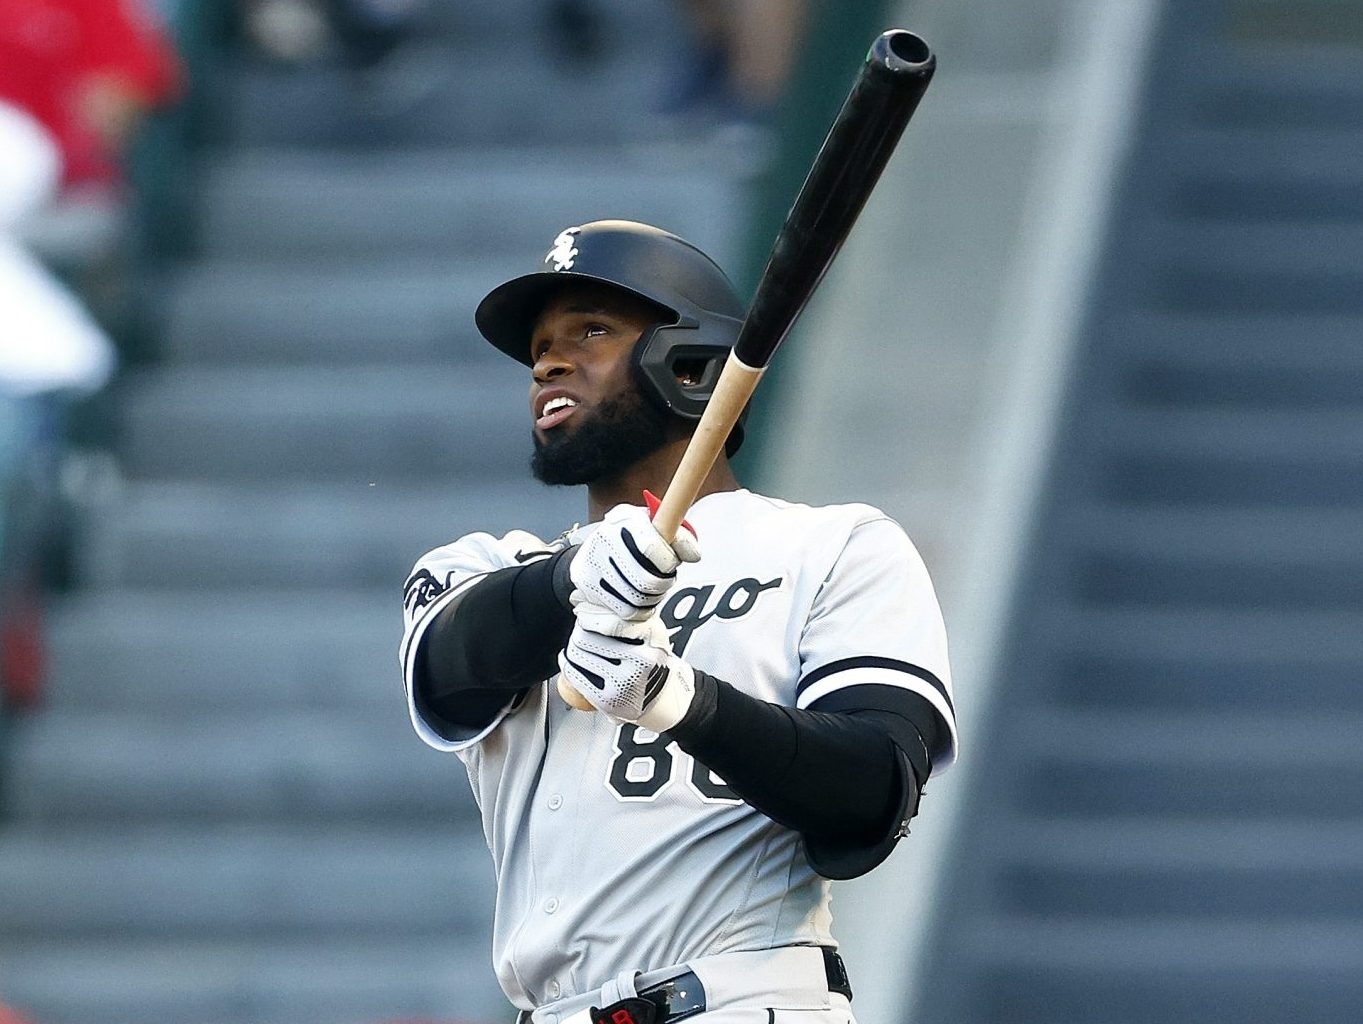 Luis Robert Jr. to represent White Sox in Home Run Derby